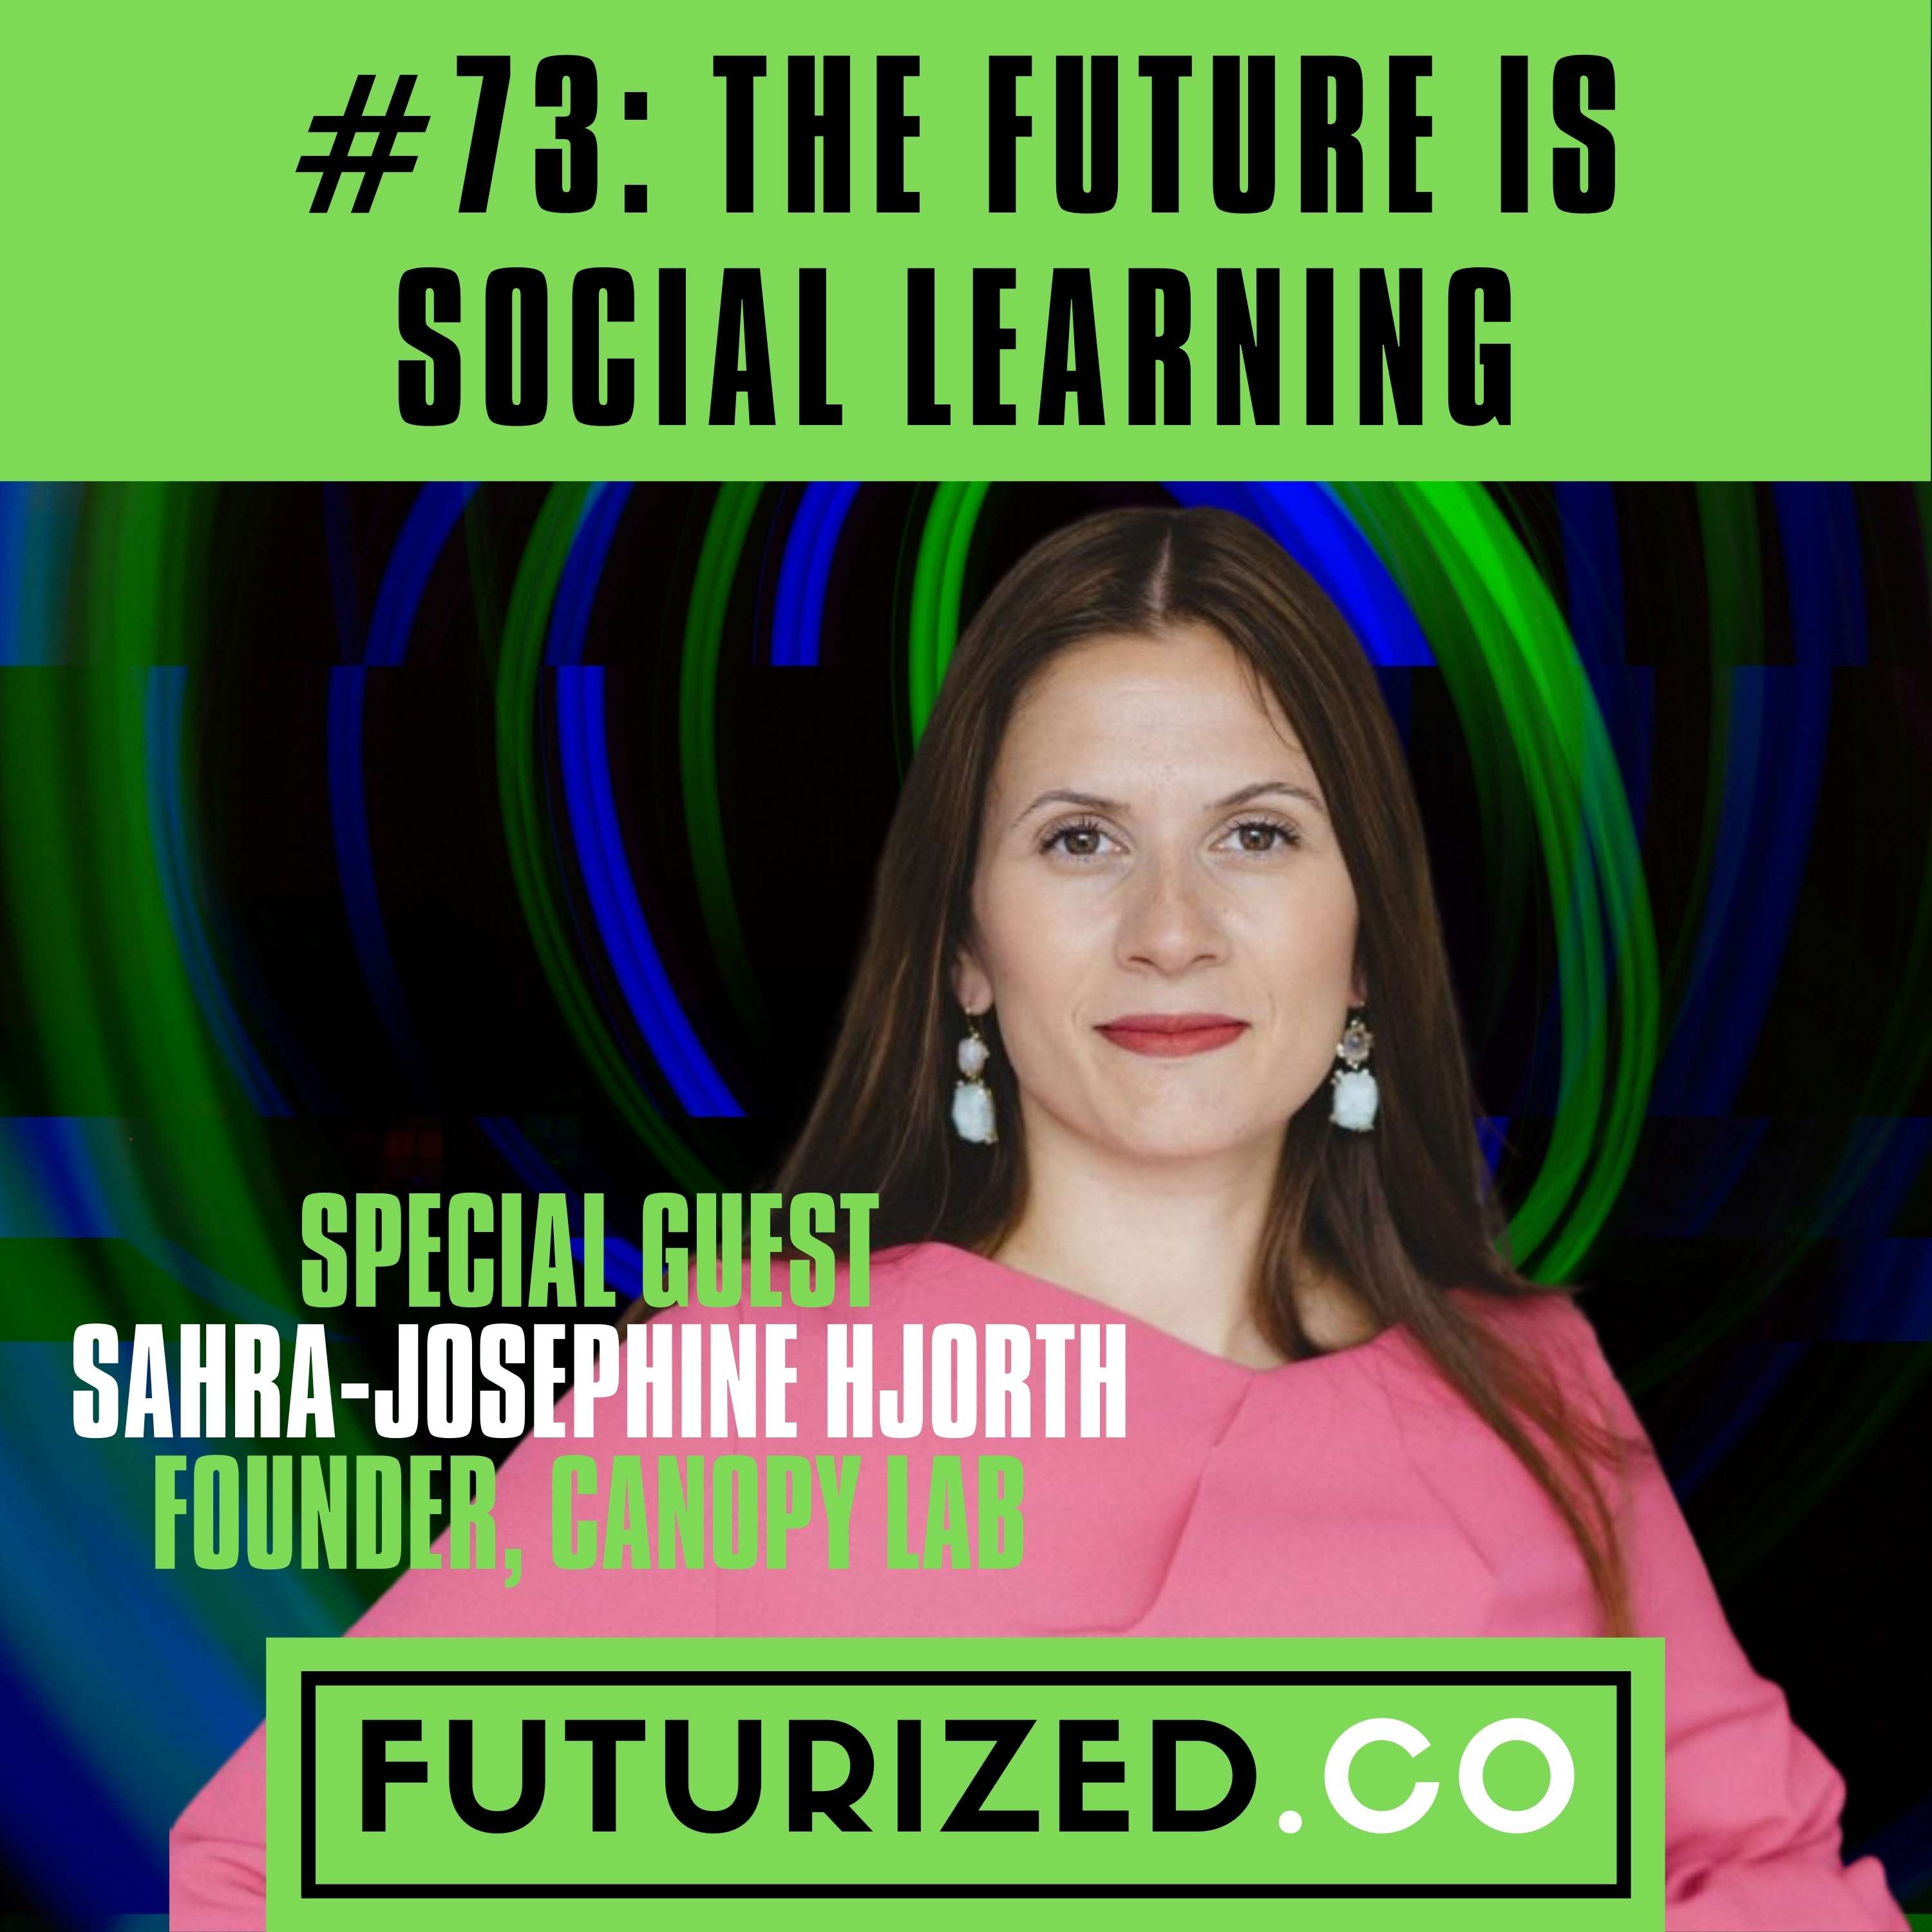 The Future of Social Learning Image